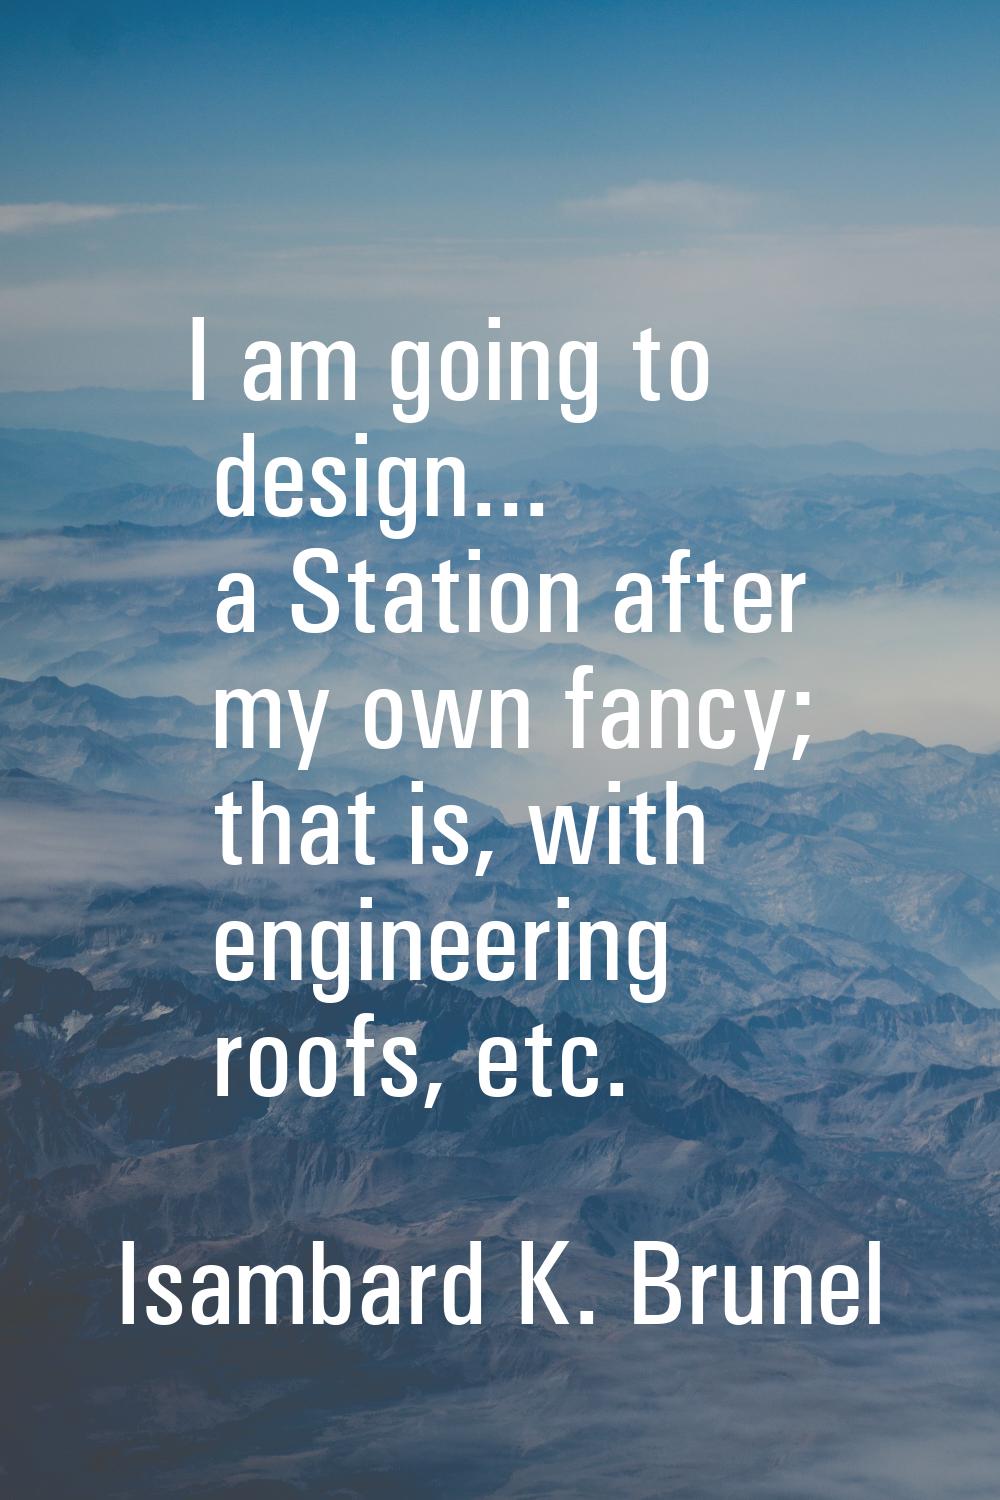 I am going to design... a Station after my own fancy; that is, with engineering roofs, etc.